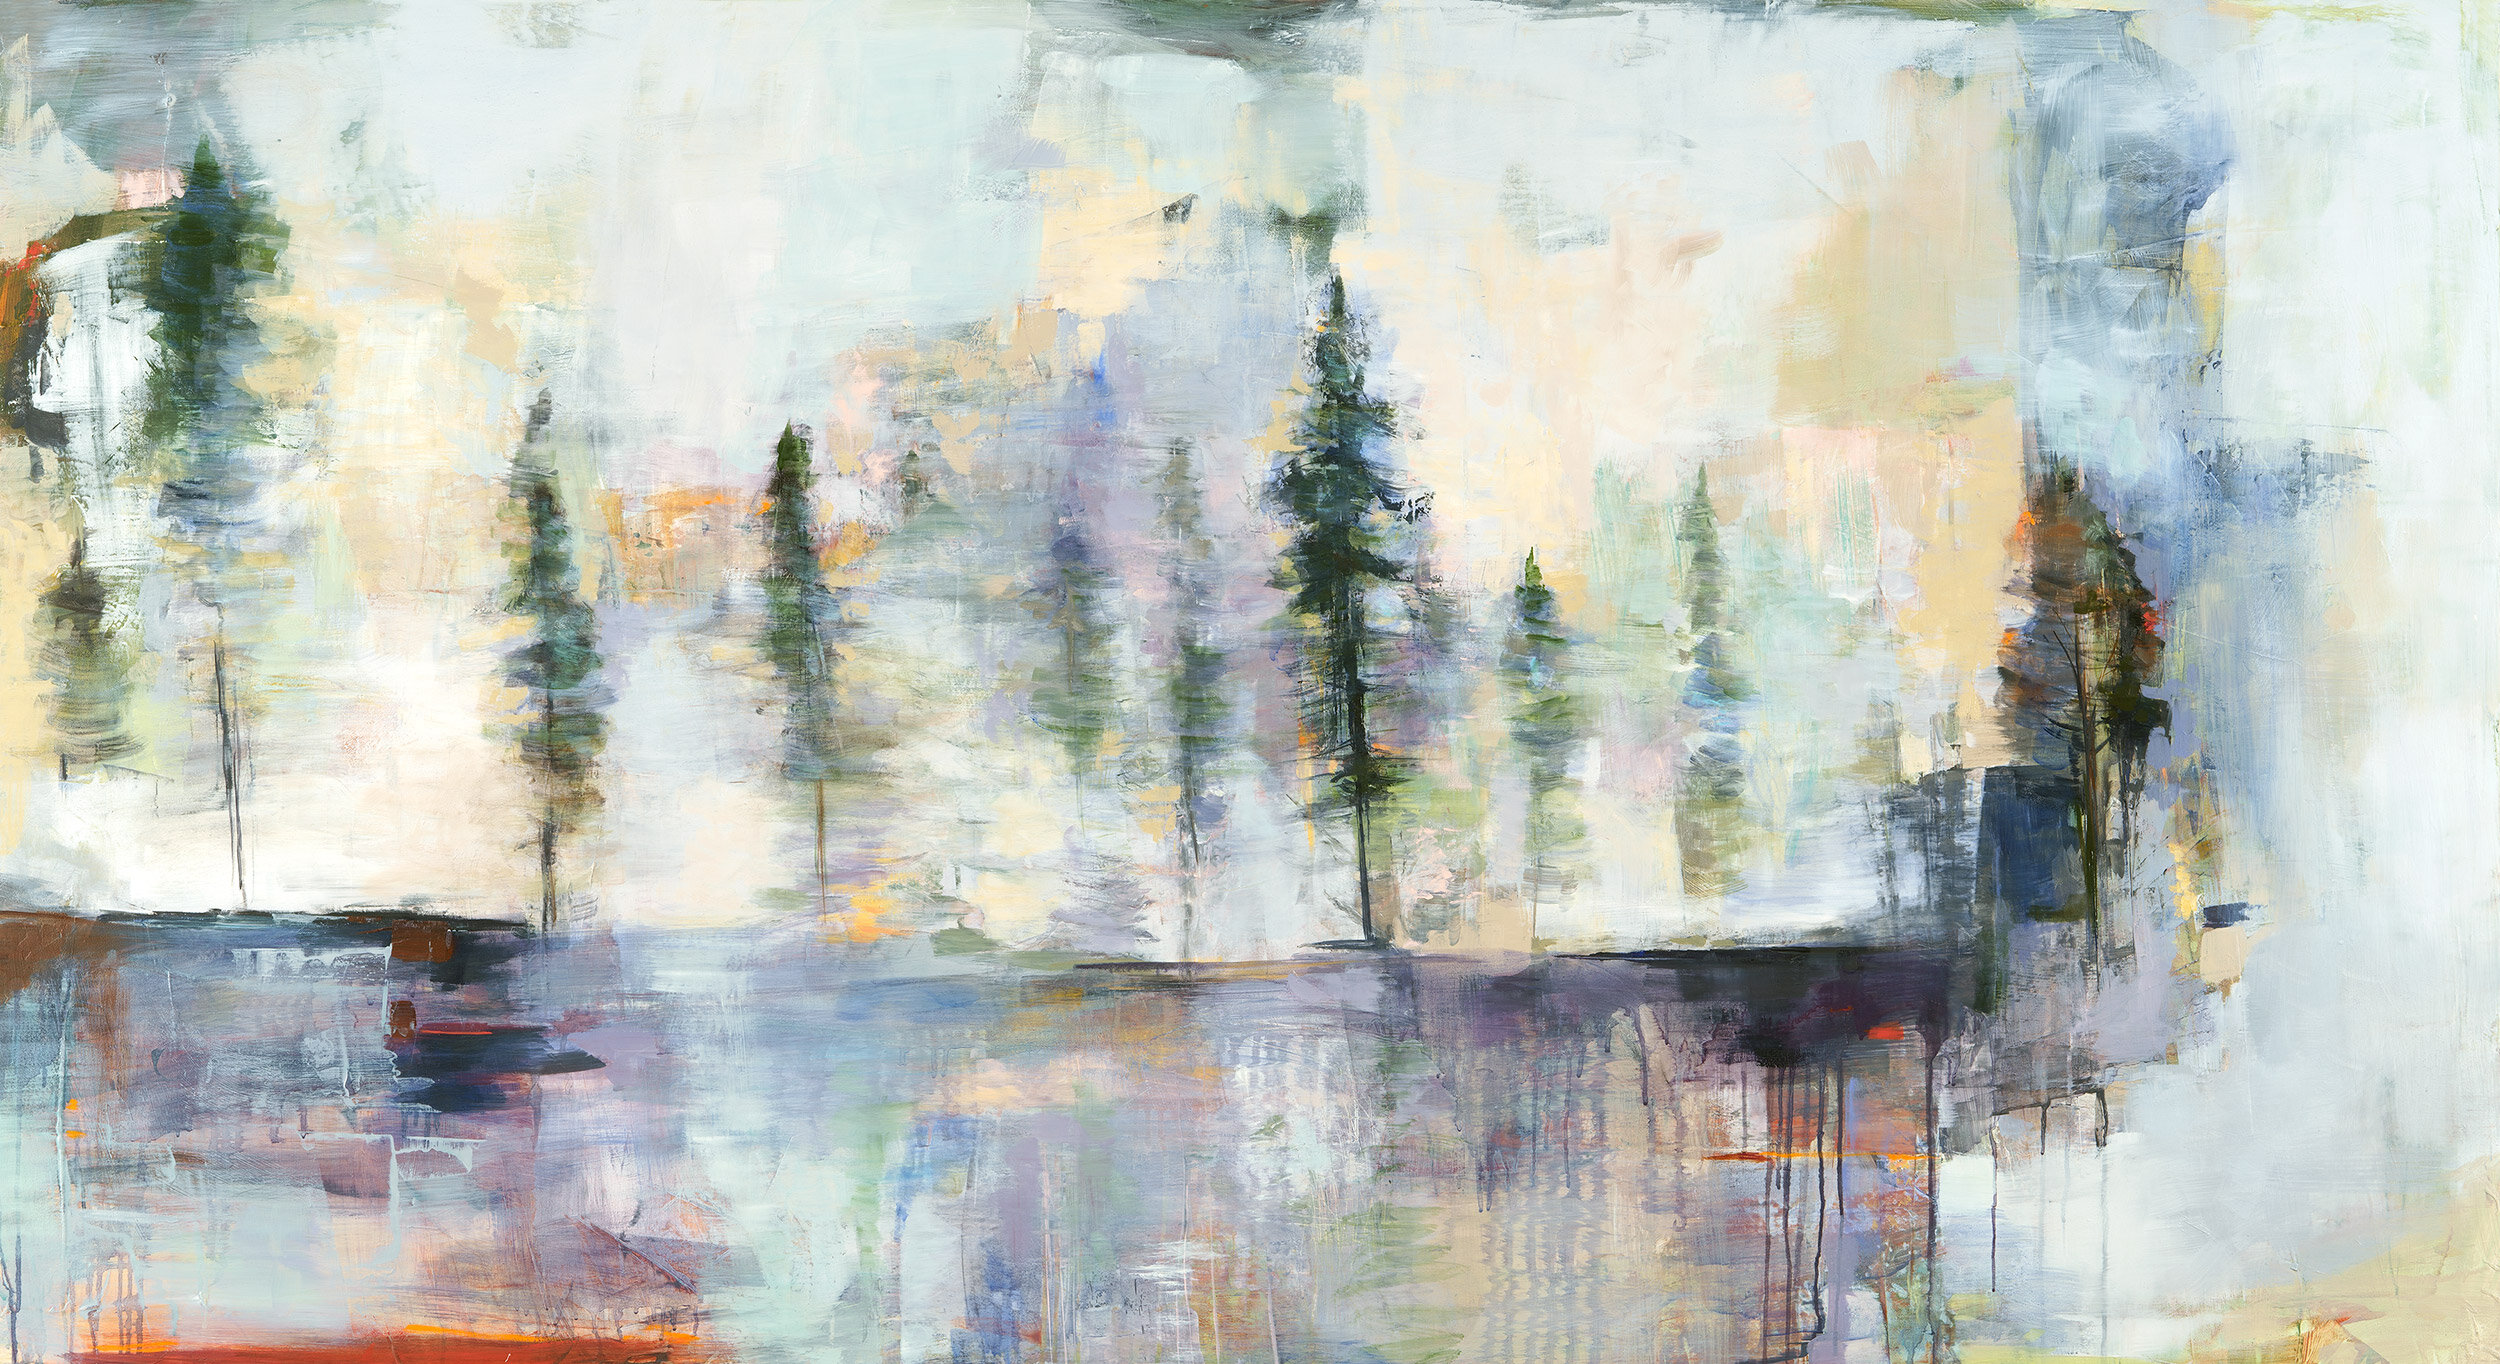   Northern Light  Oil on wood 36x72 inches SOLD 